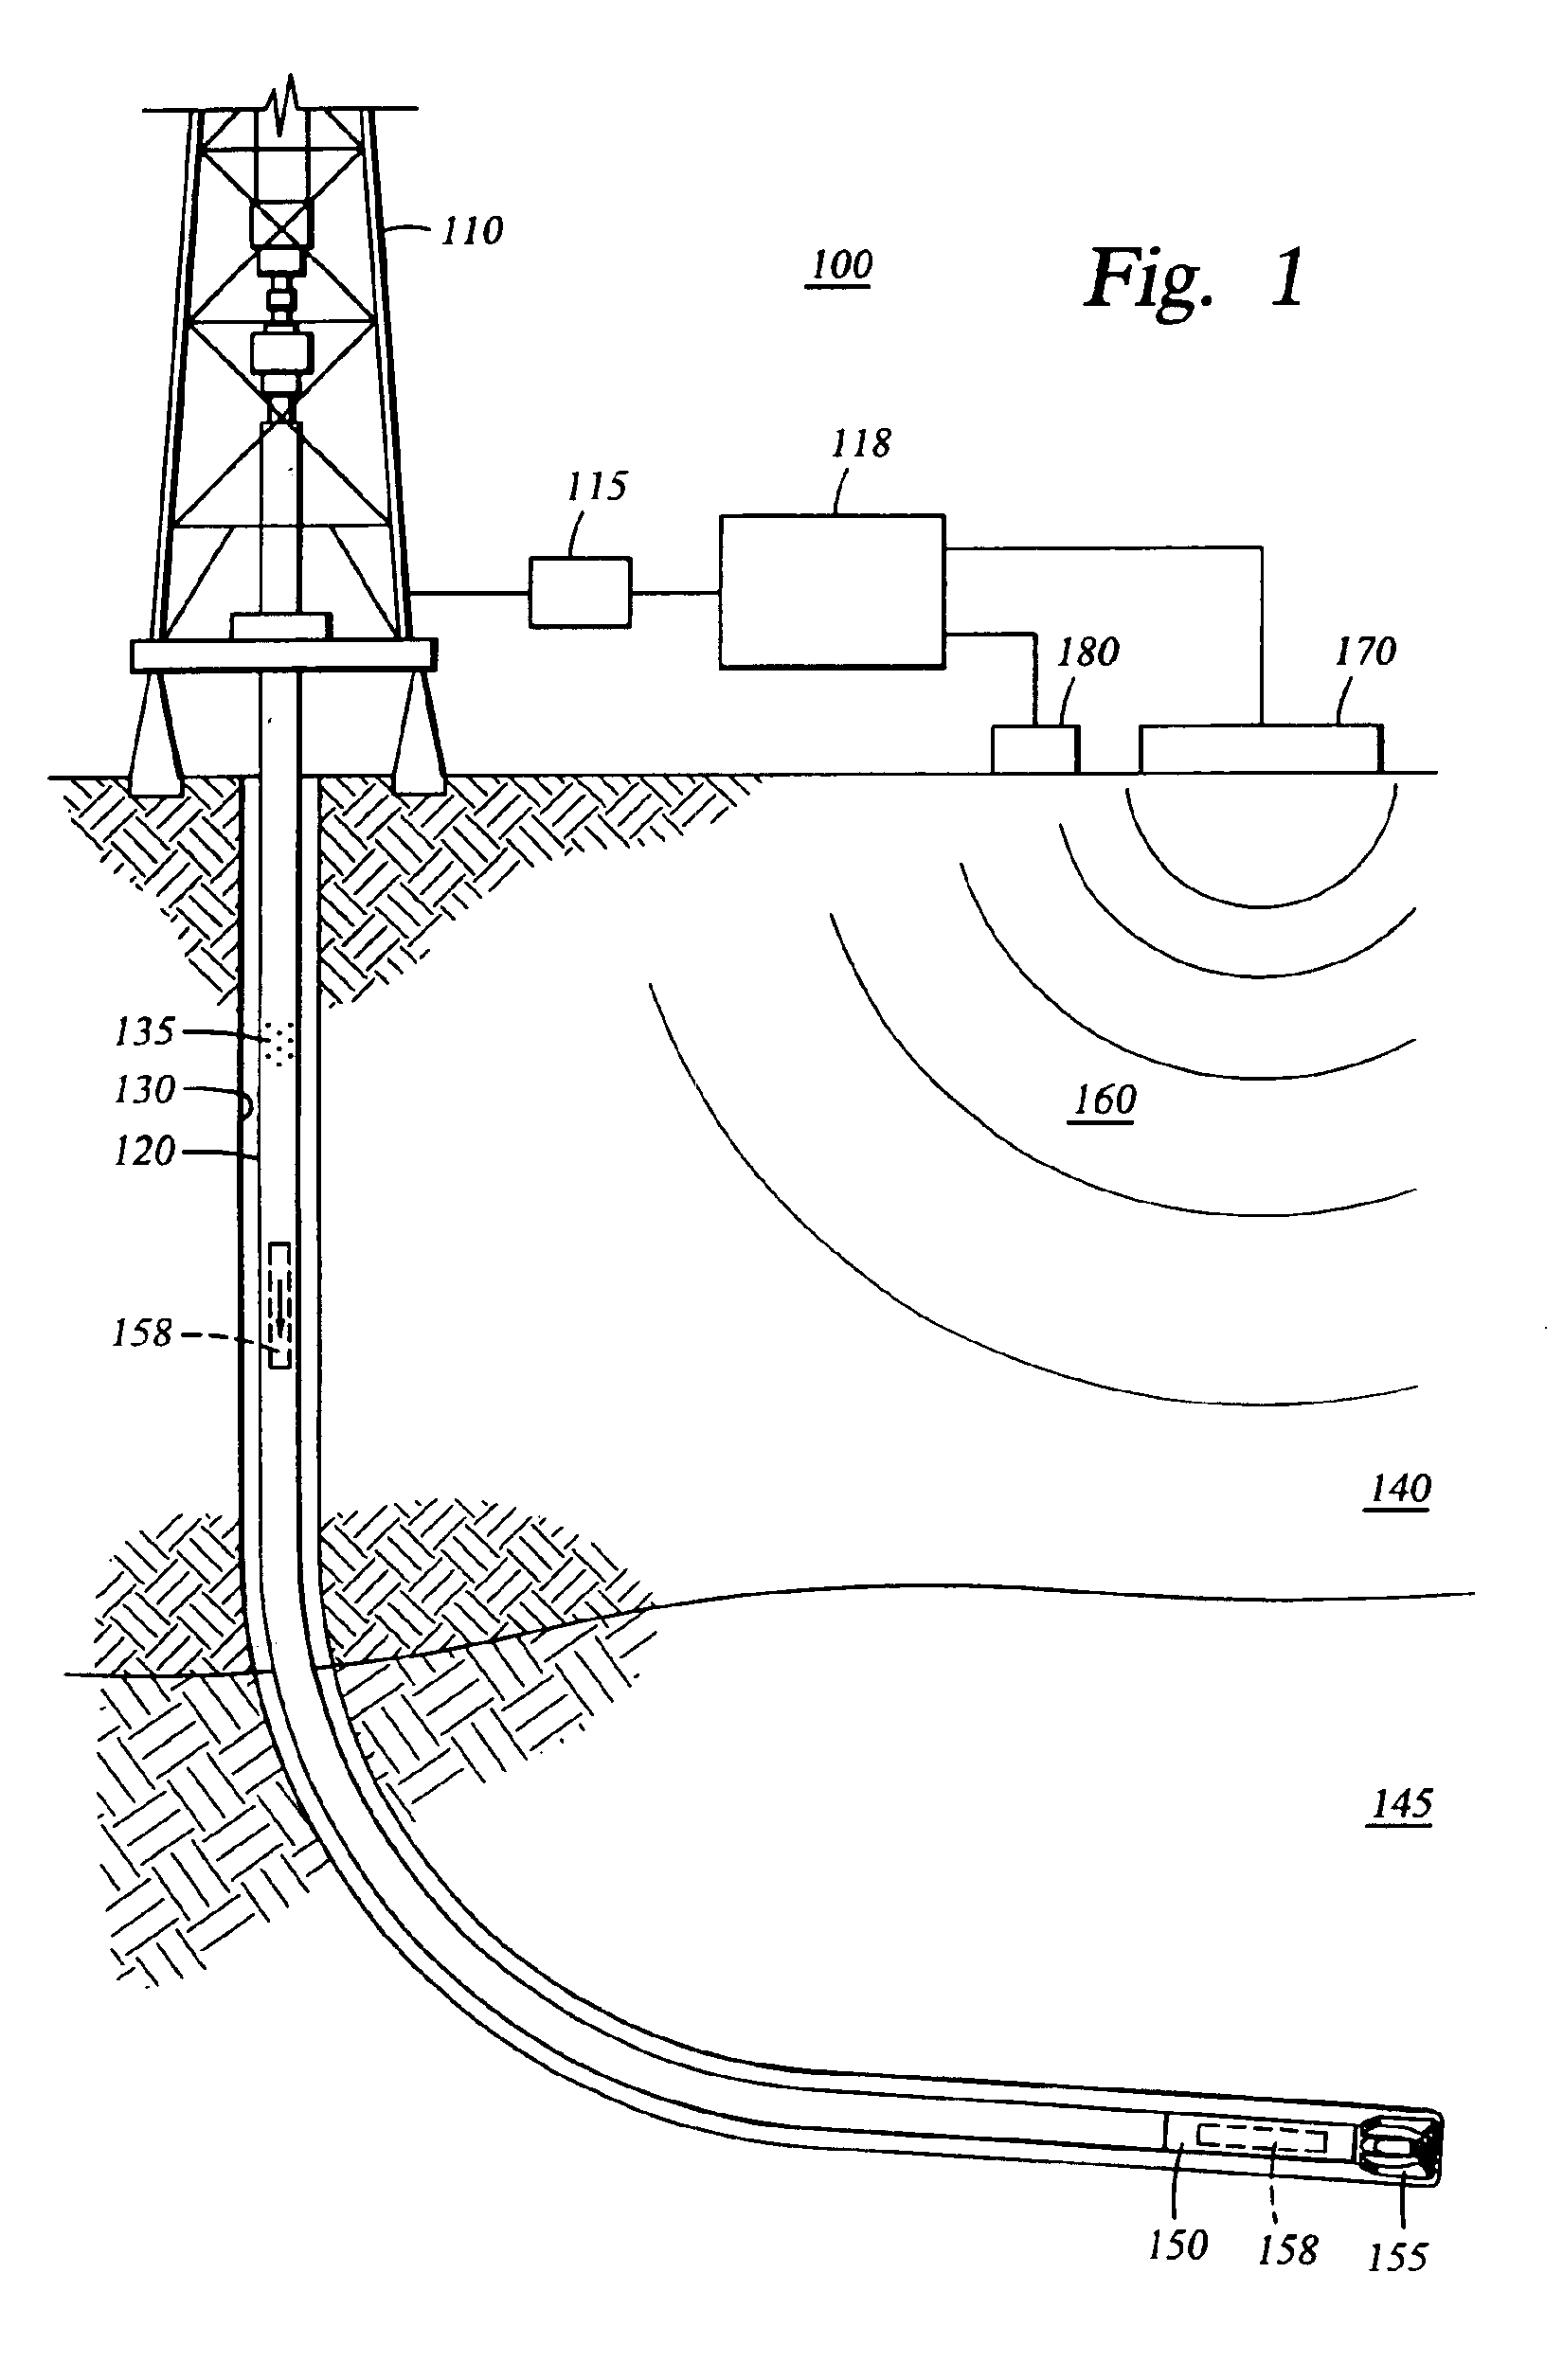 Methods for acquiring seismic data while tripping